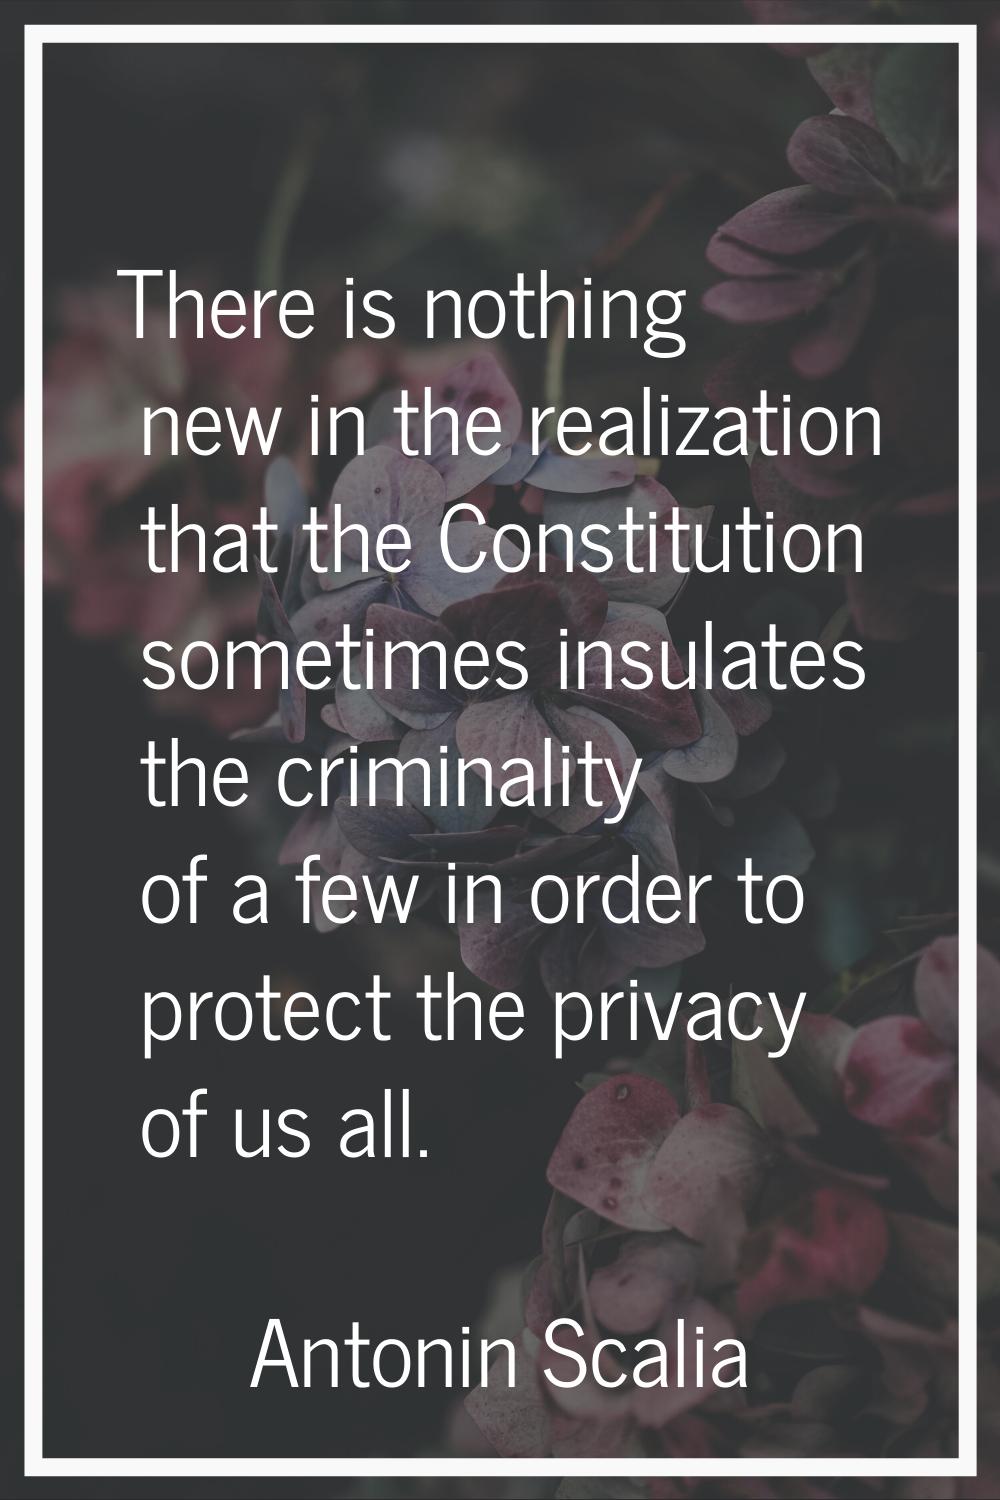 There is nothing new in the realization that the Constitution sometimes insulates the criminality o